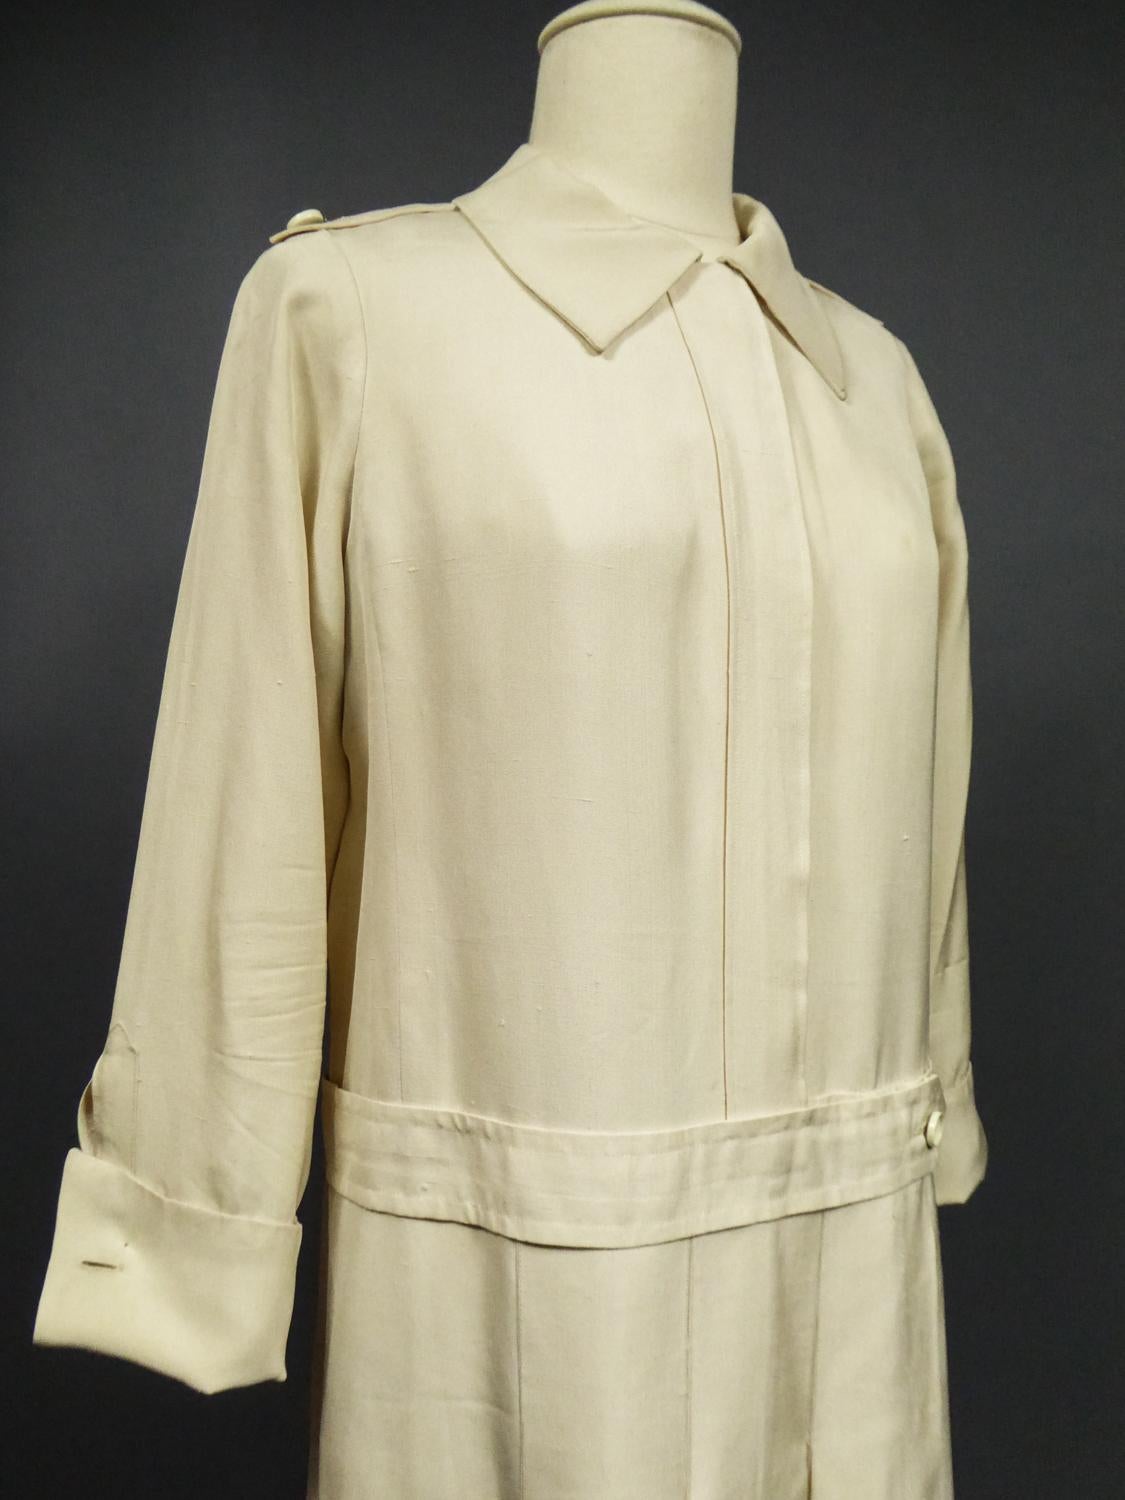 An Yves Saint Laurent Cocktail Dress Numbered 15193 - 1965 Collection 6